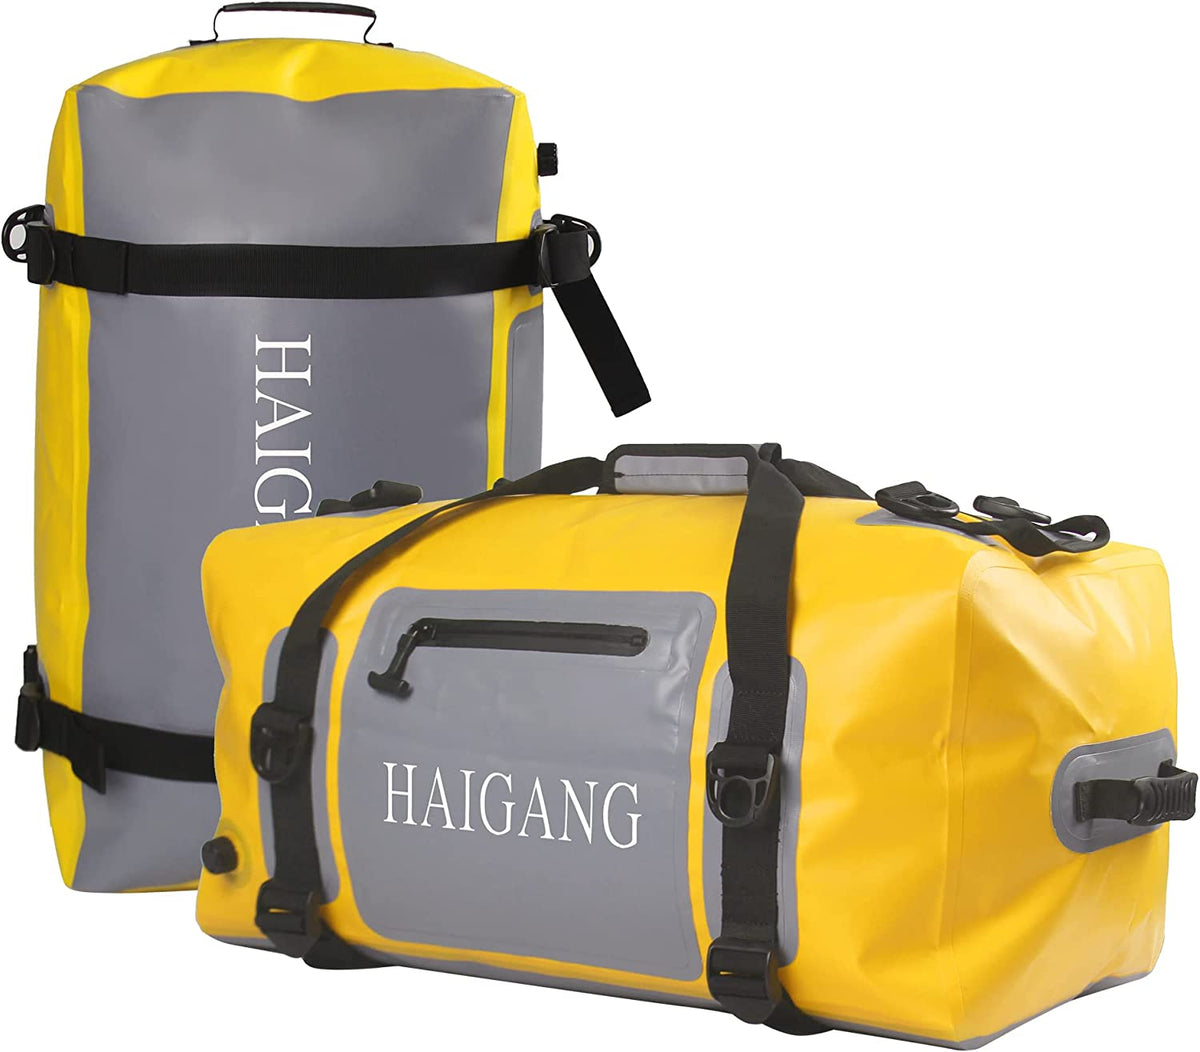 Haigang 70L/110L Waterproof Duffel Bag, Large Capacity, Adjustable Thickened Straps and Handles, Zip Closure, Air Valve Keeps Equipment Safe, Perfect for Boating Rafting Motorcycle Camping Kayak